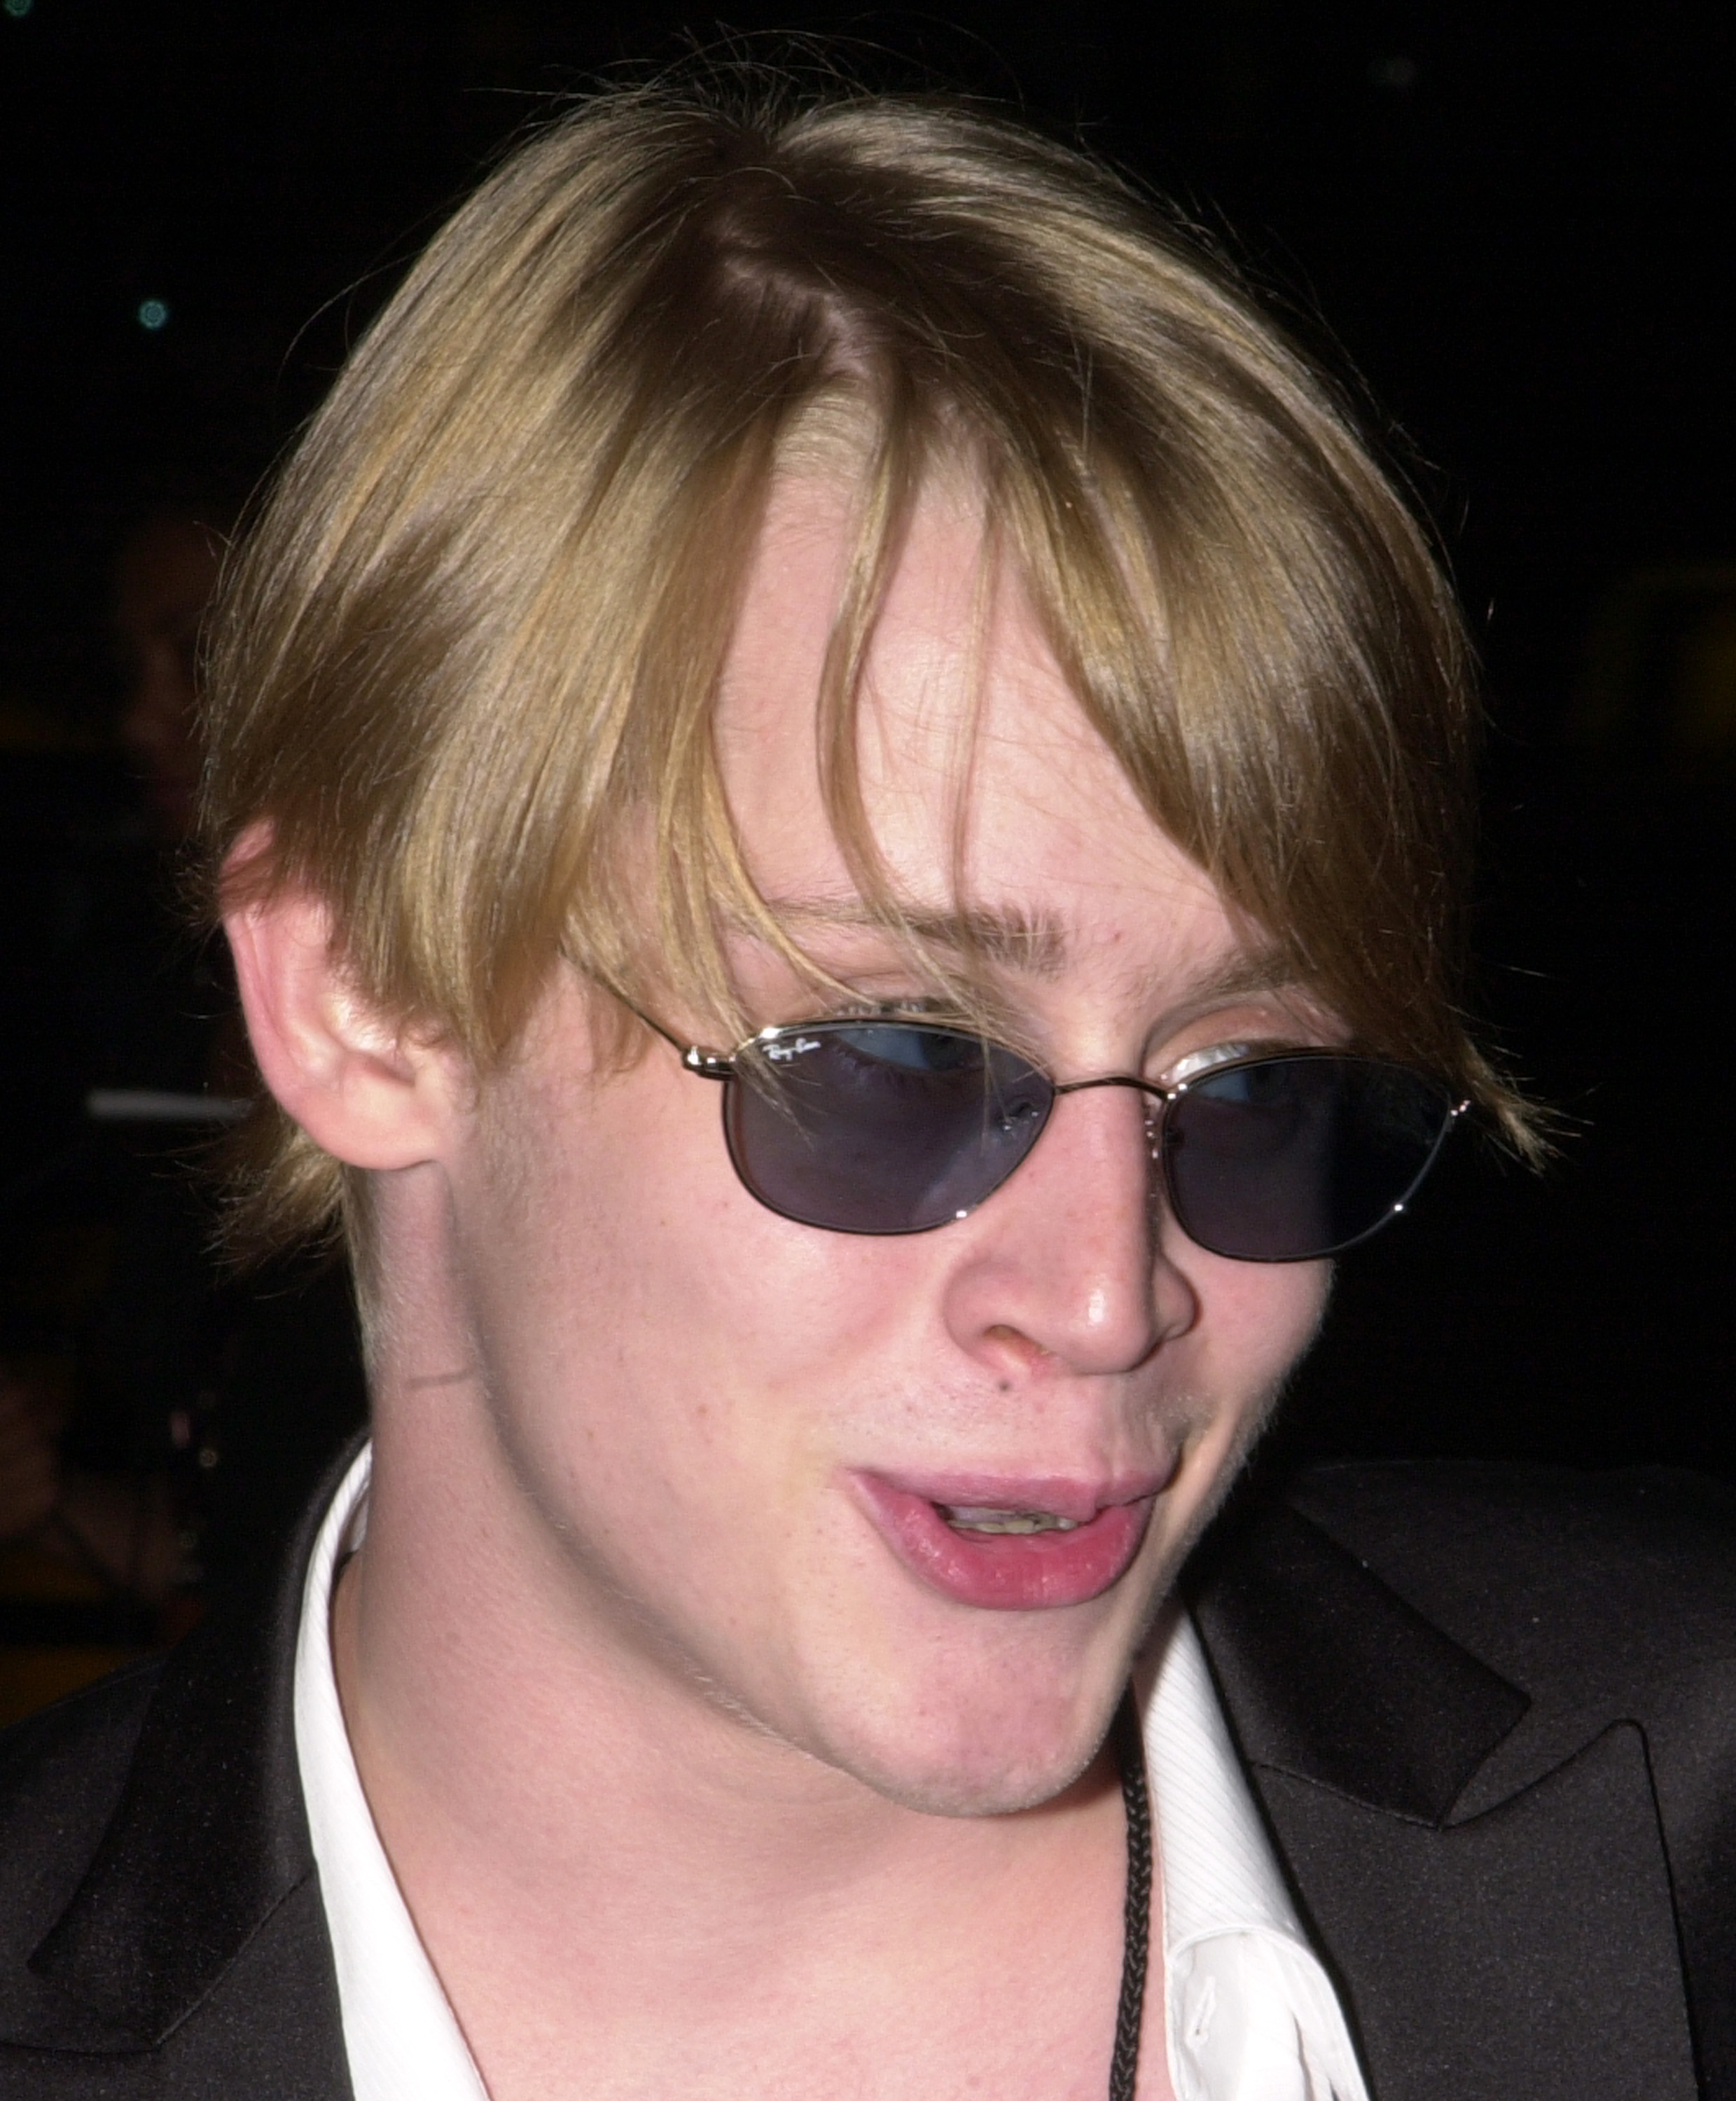 Macaulay Culkin during Michael Jackson's 30th Anniversary Celebration in New York City | Source: Getty Images